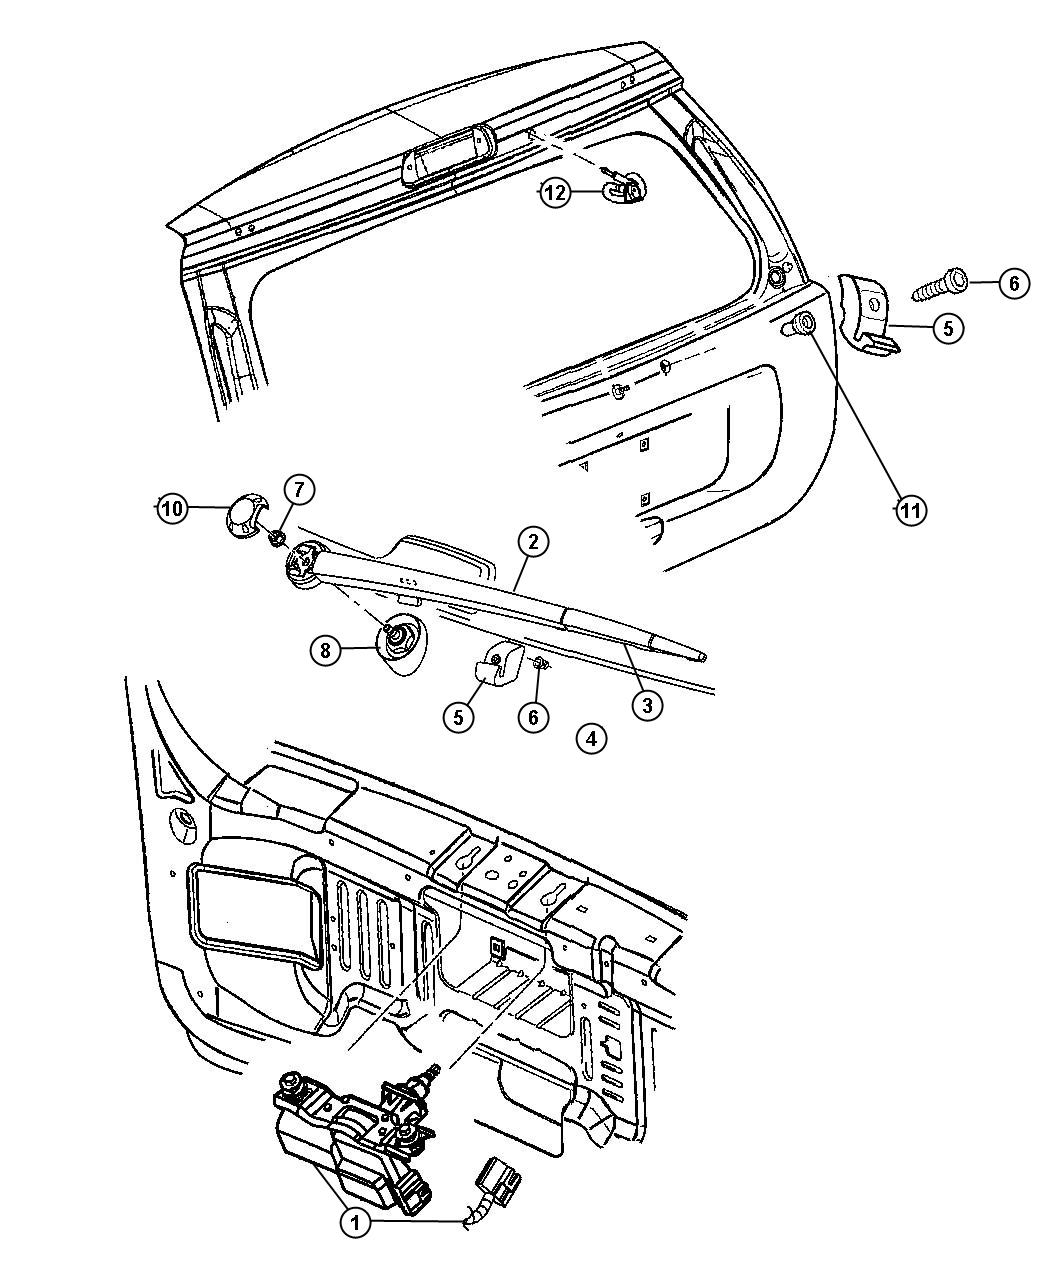 Rear Wiper and Washer System. Diagram